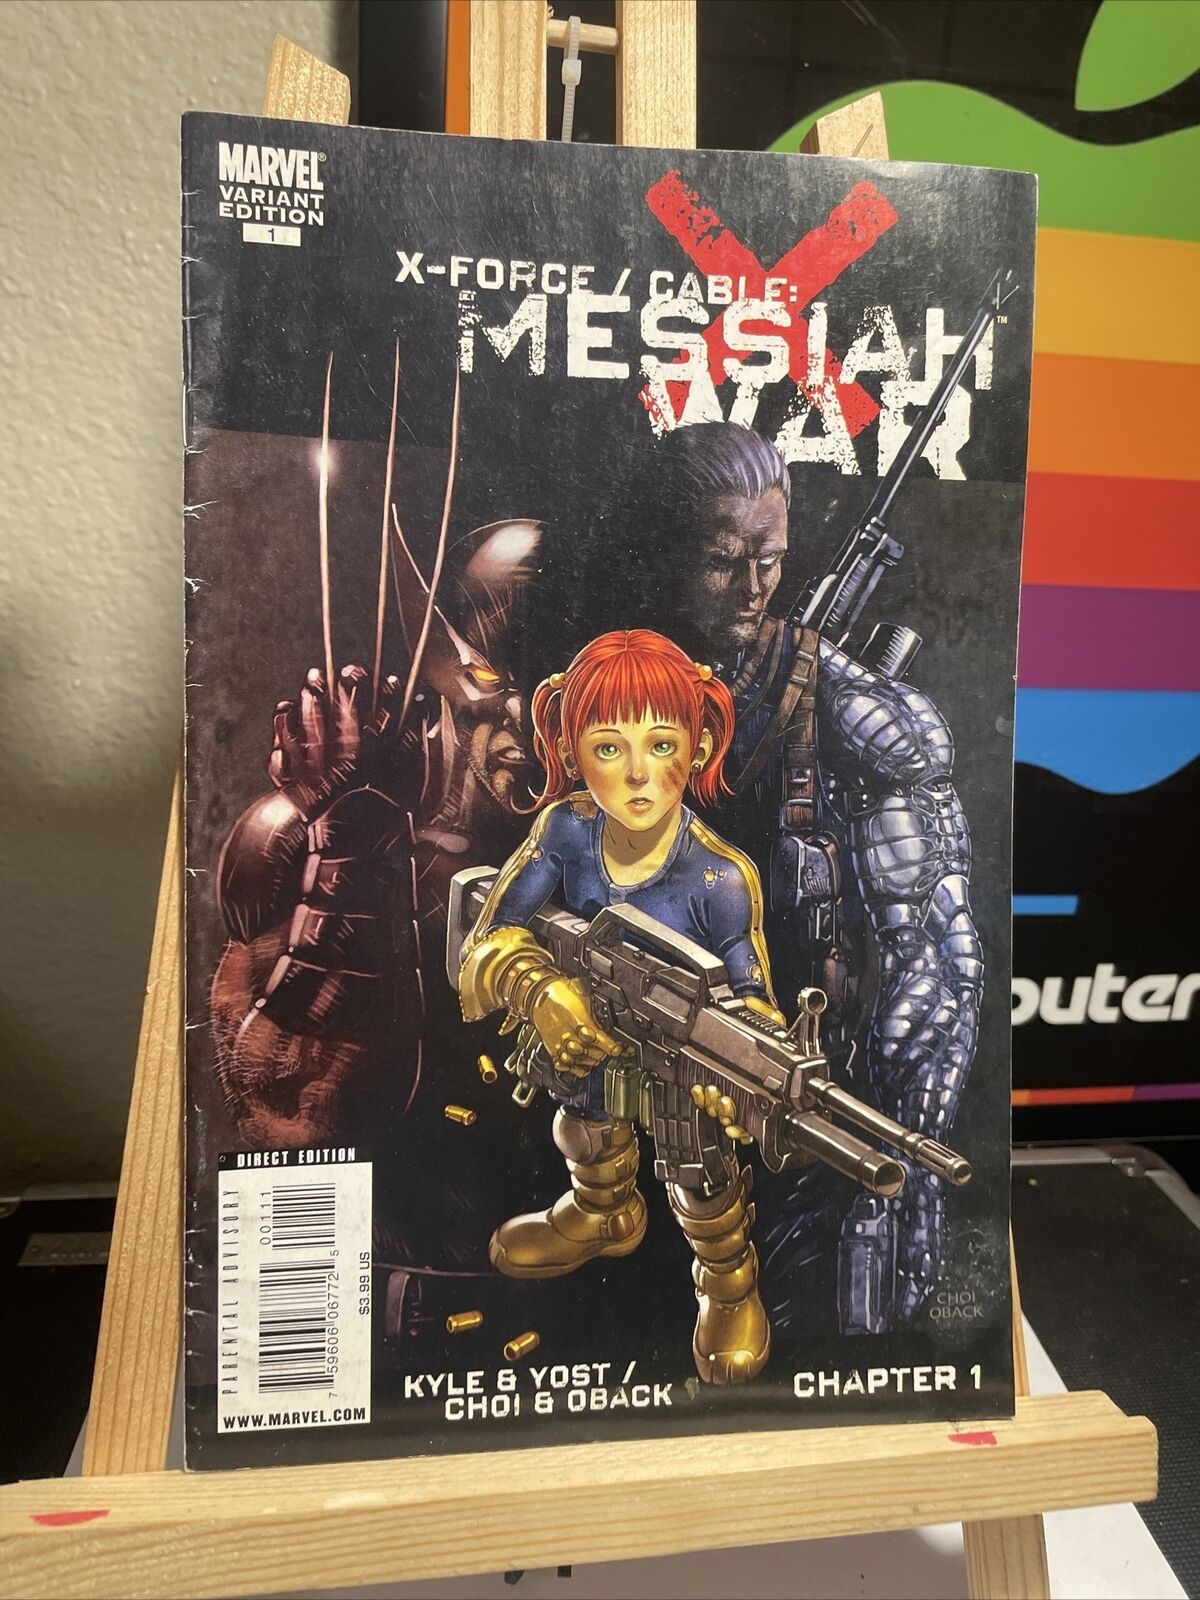 X-Force / Cable: Messiah War #1 (Marvel, May 2009)